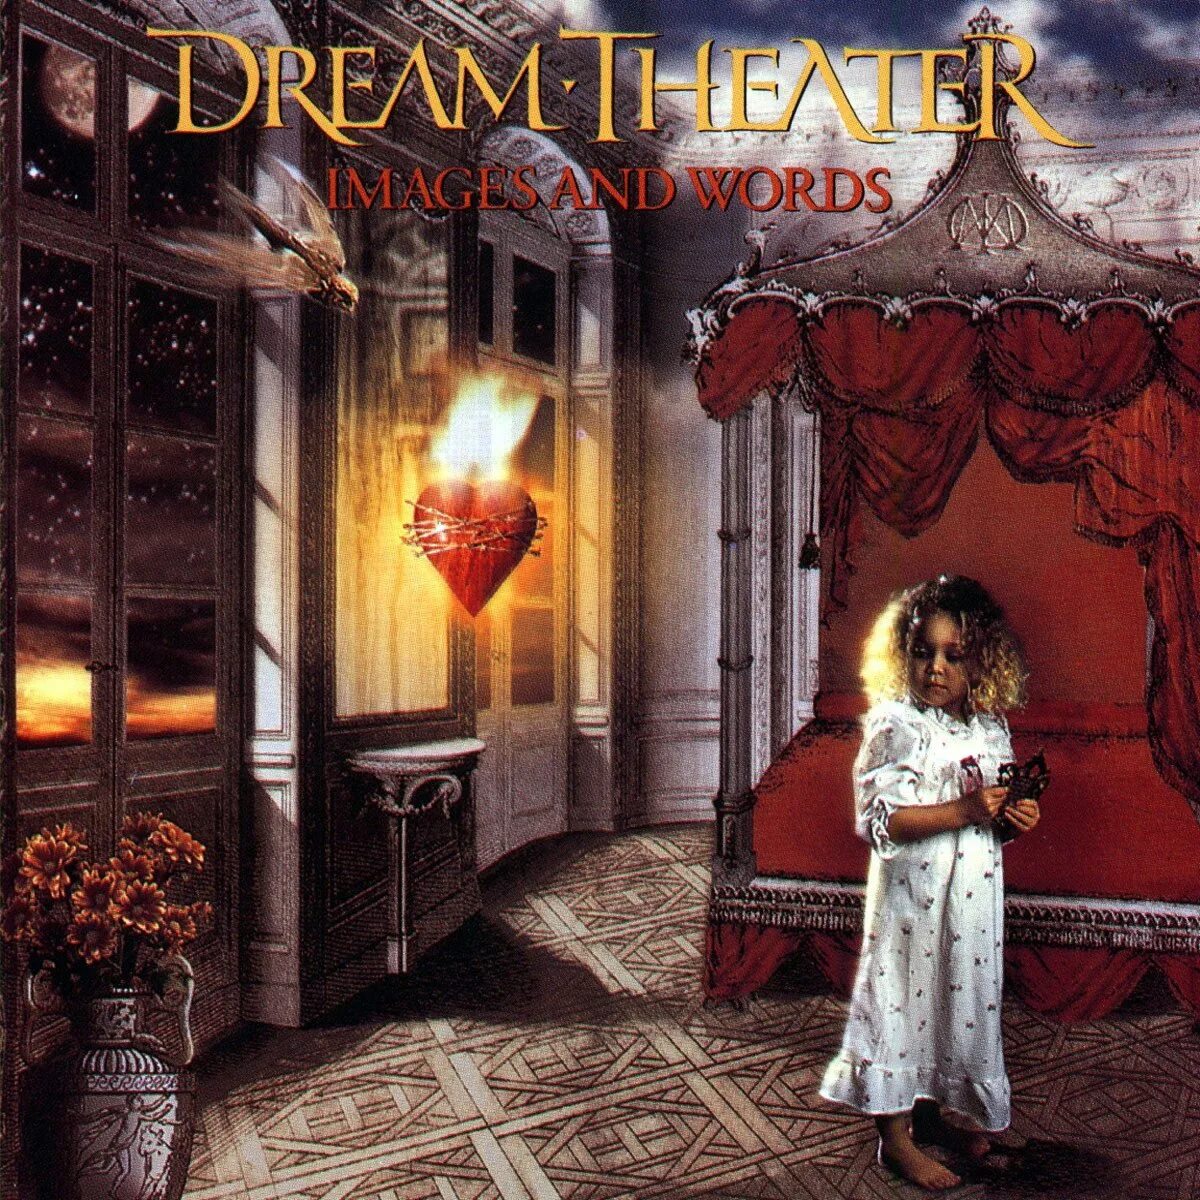 Dream Theater images and Words 1992. Dream Theater обложки альбомов. Dream Theater images and Words. Word image. Dream theater альбомы